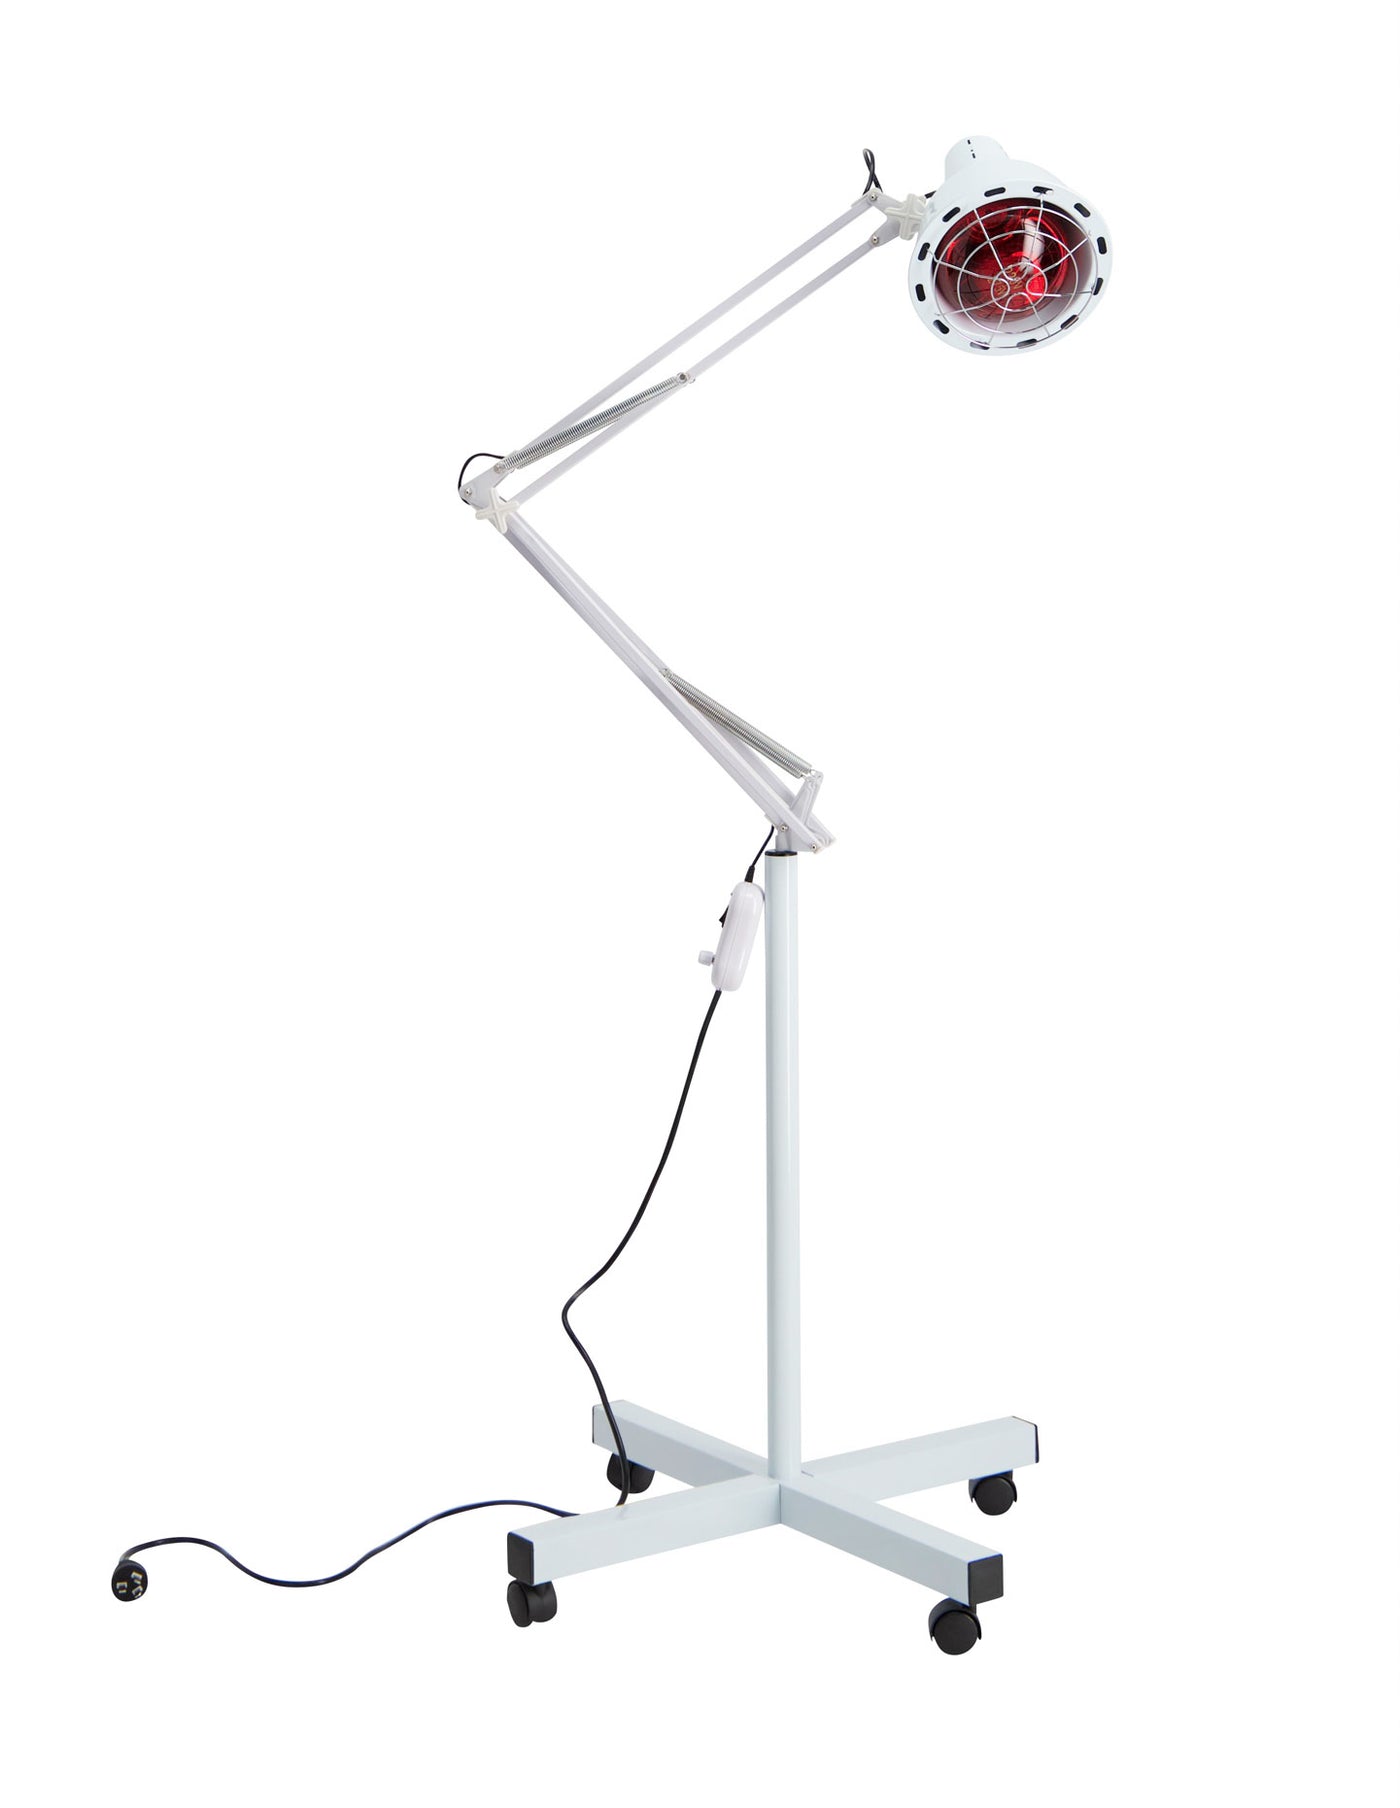 Infrared Lamp Use & Safety